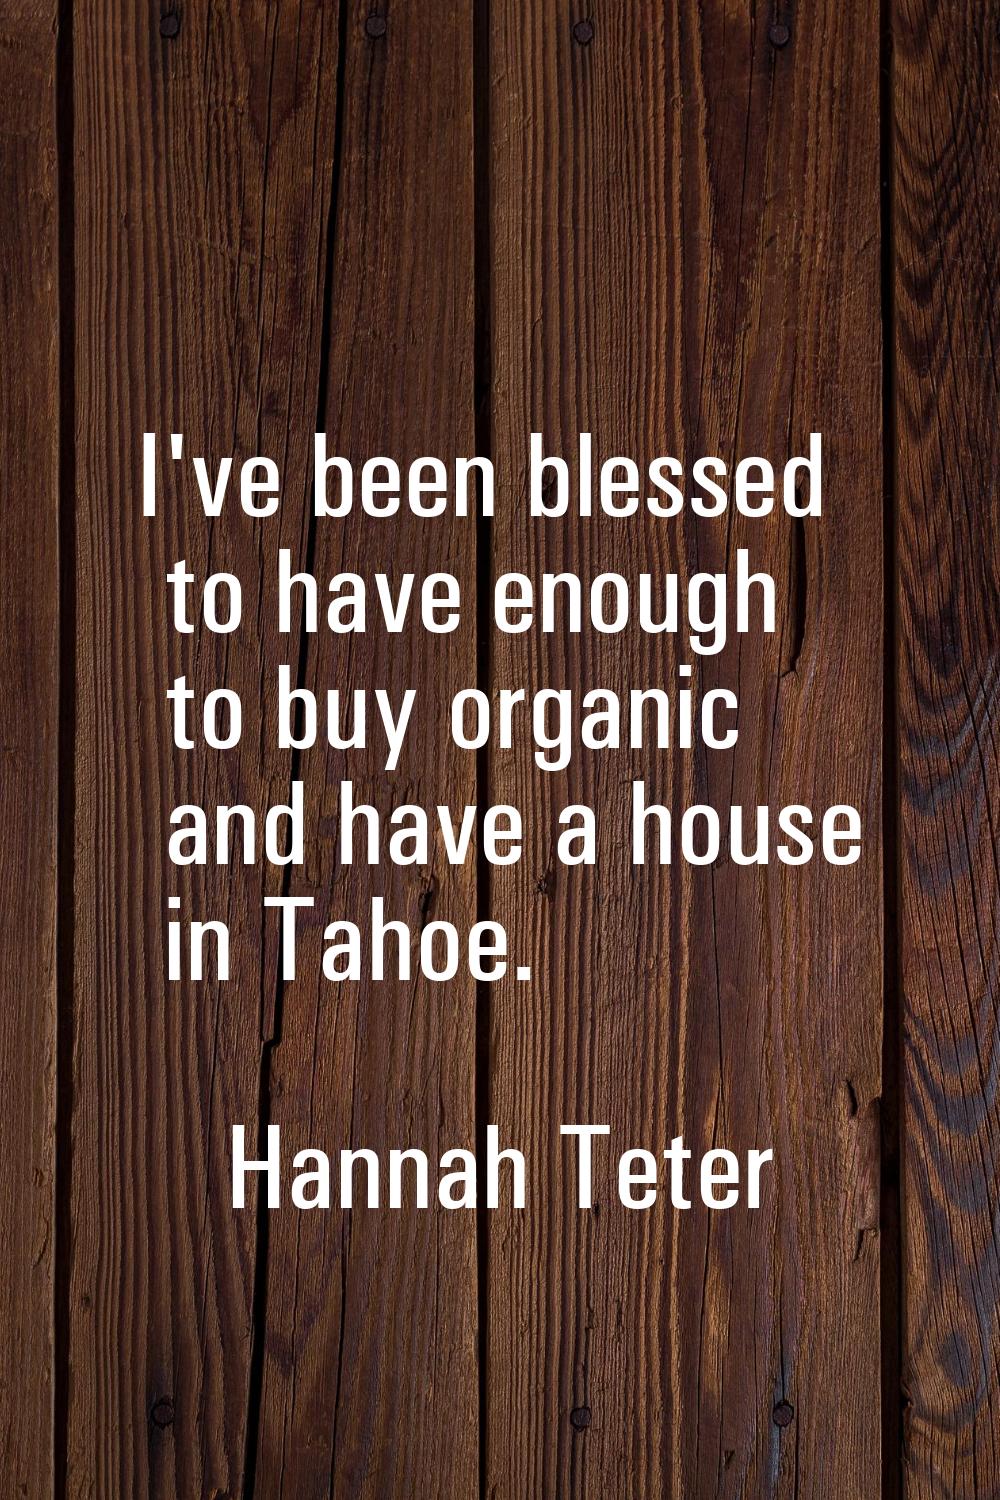 I've been blessed to have enough to buy organic and have a house in Tahoe.